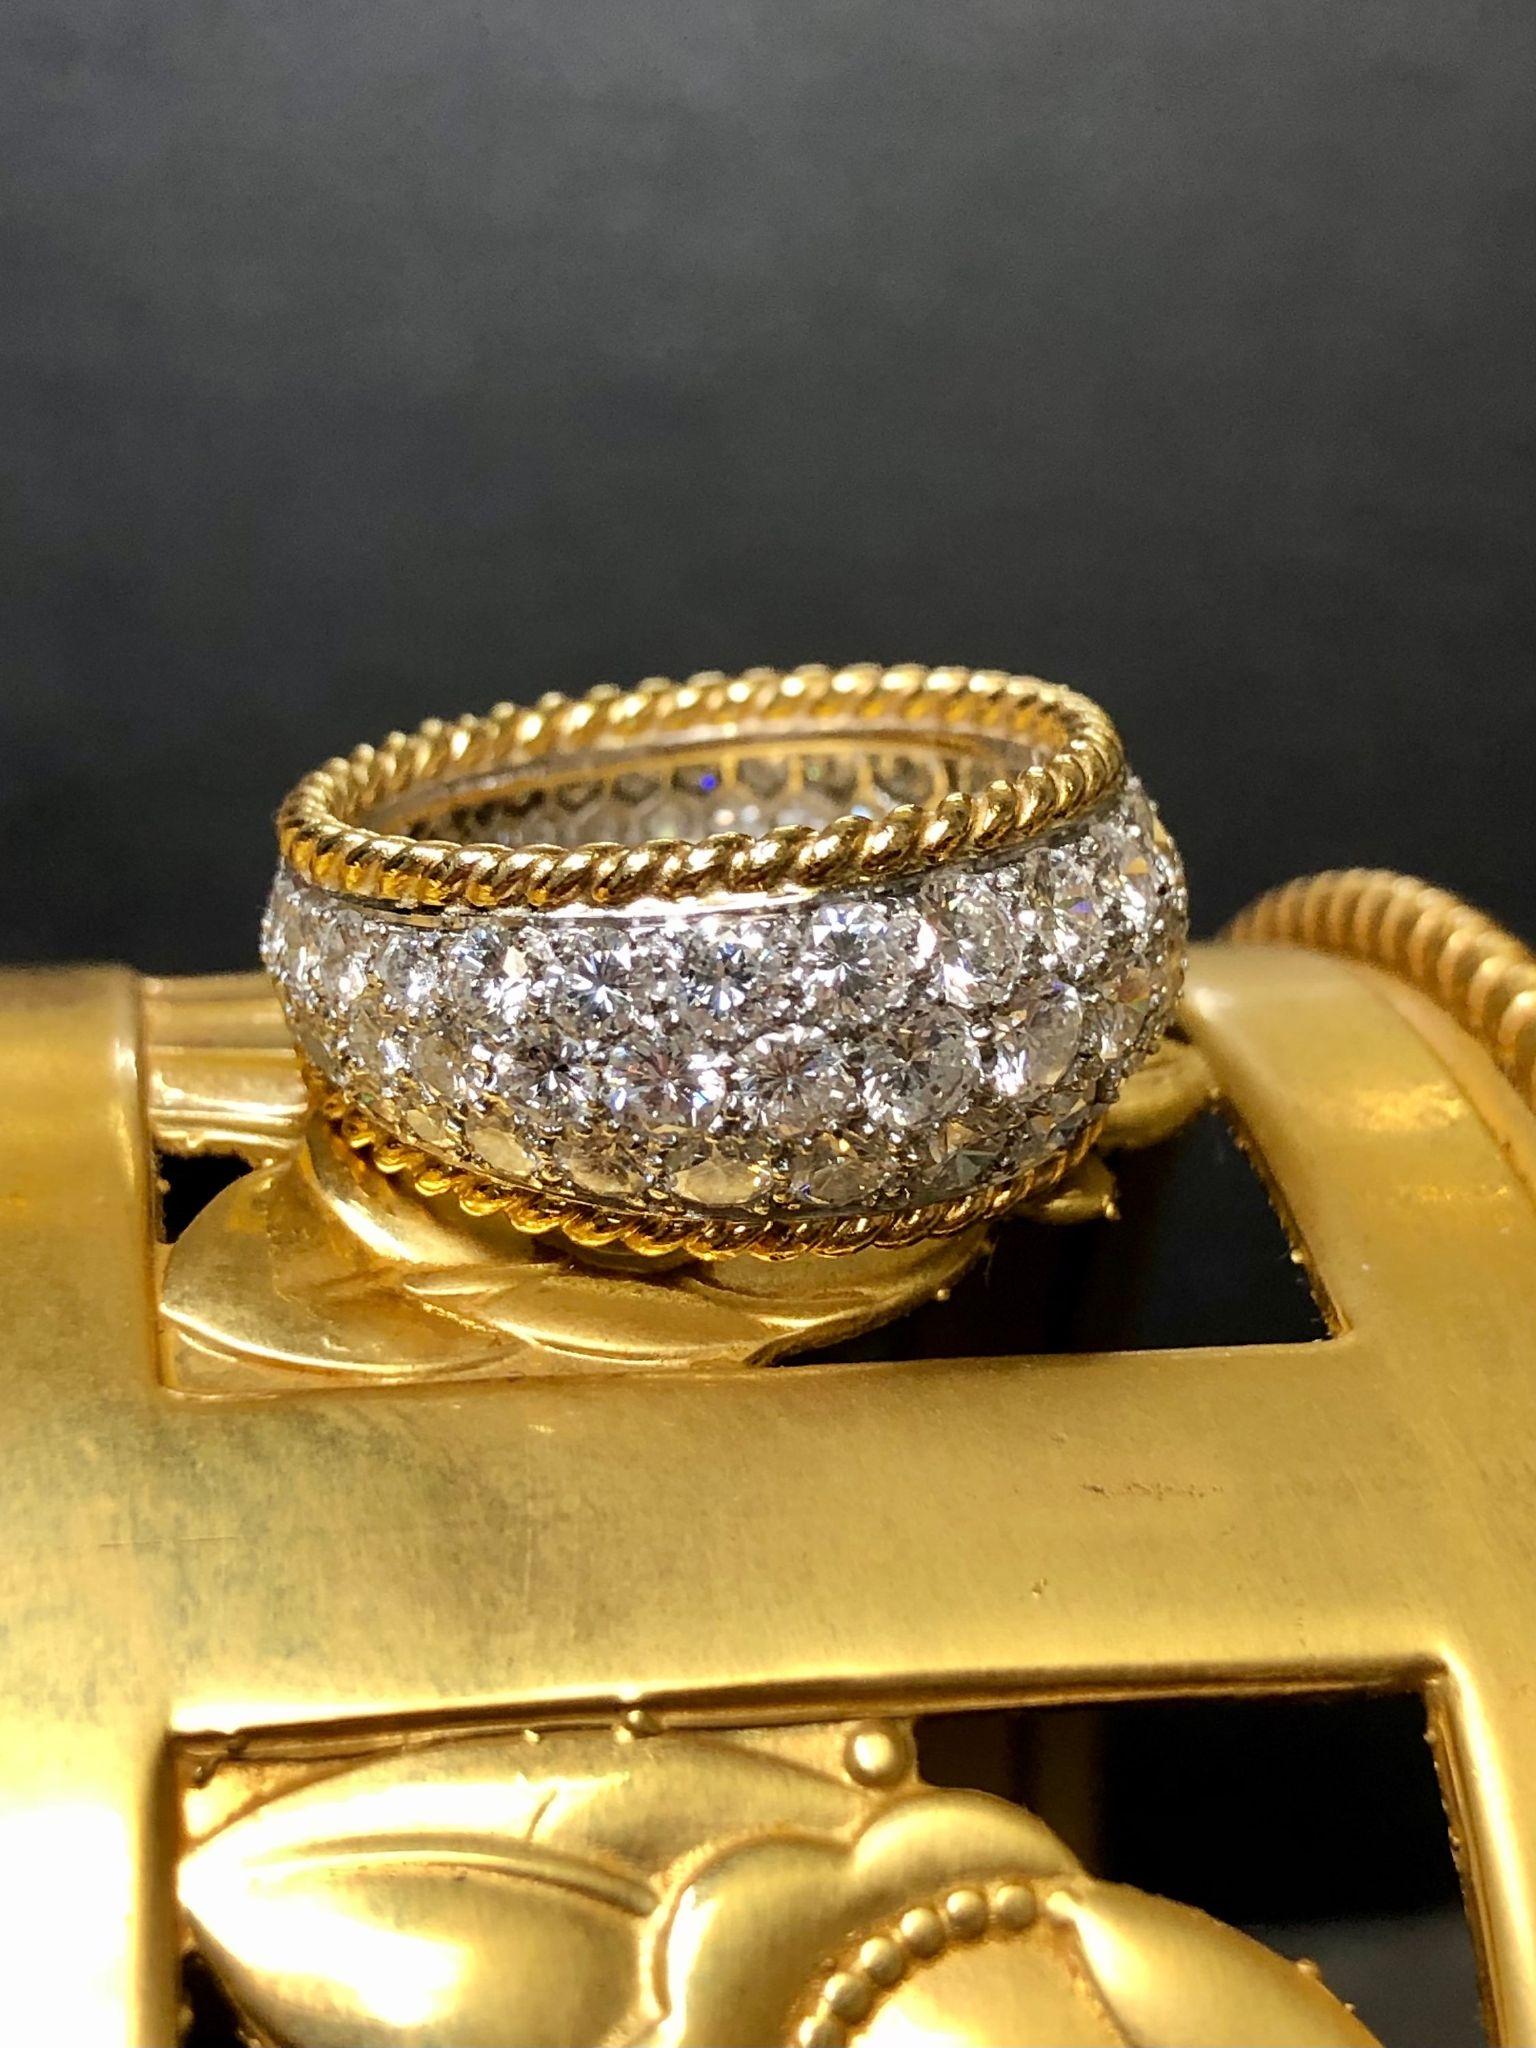 This ring is simply exquisite and the quality is exceptional down to the azuring on the inside of the band. You know that when the inside of a piece is as beautiful as it’s outside, you have something special. This piece is done in platinum with 18K